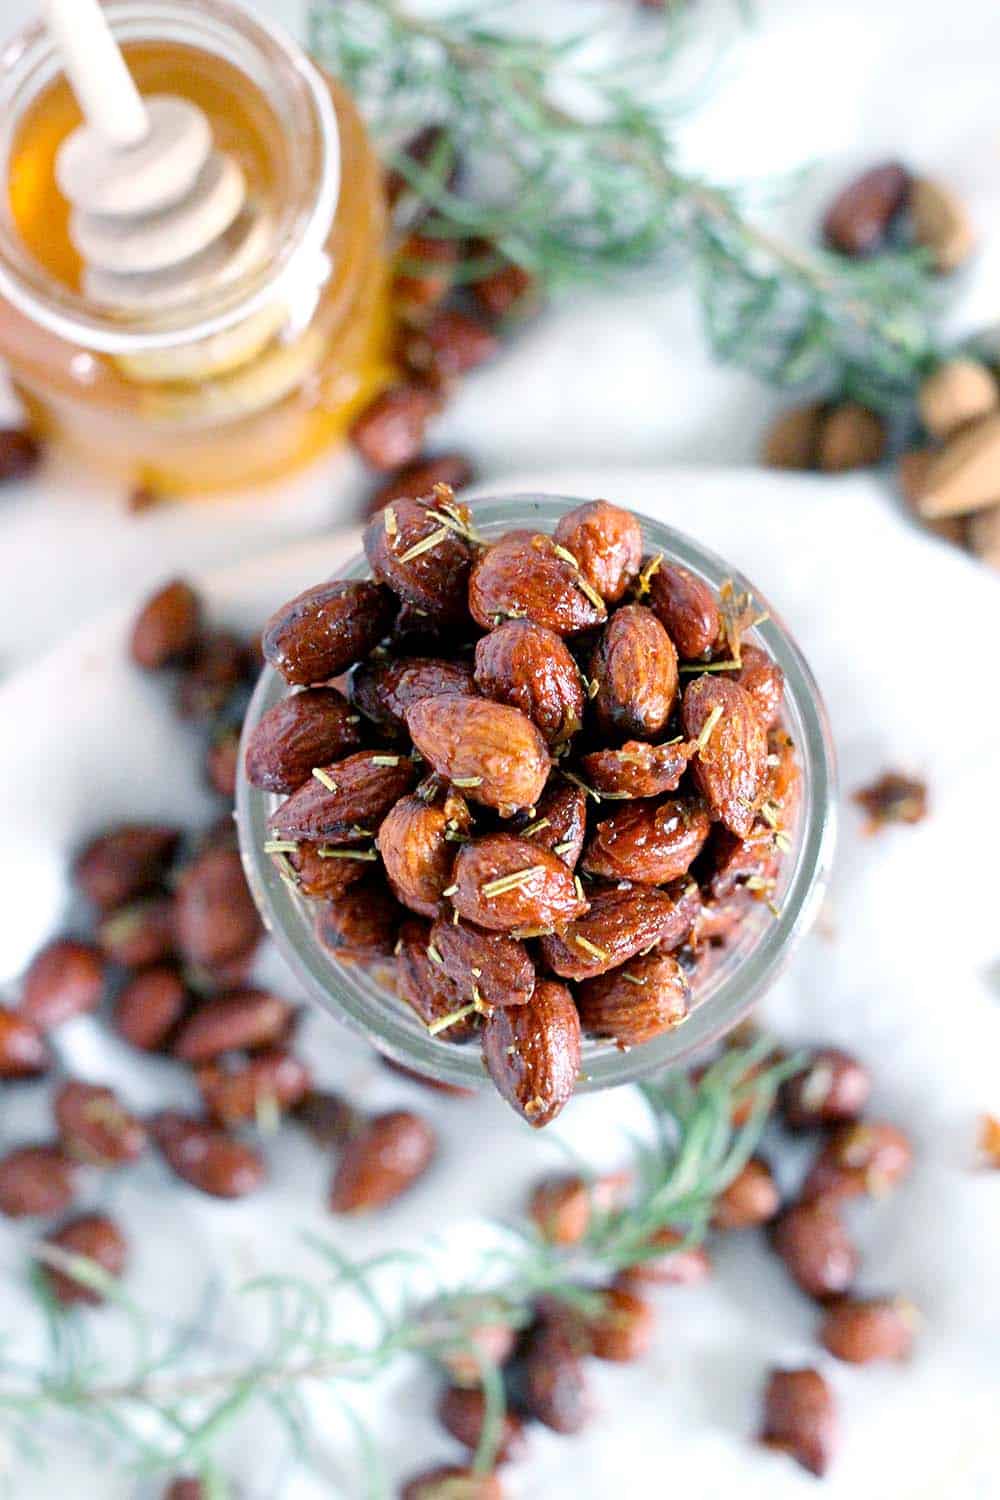 These Rosemary and Honey Roasted Almonds are my new favorite snack recipe- savory, sweet, and nutritious for a guilt-free midday treat! Plus, they're a cinch to make.